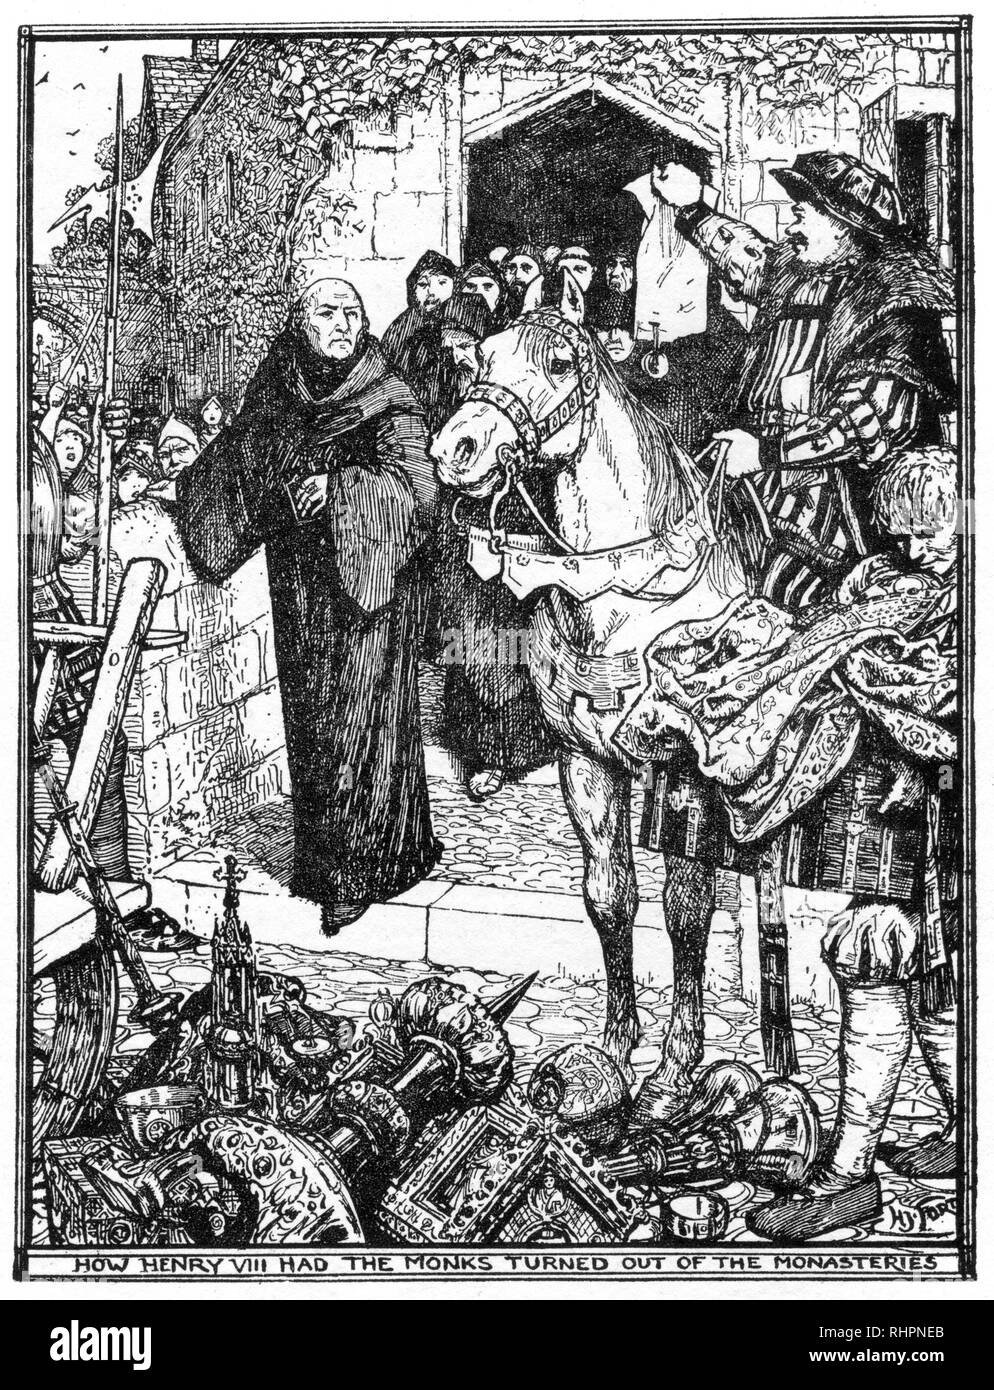 How Henry VIII had the monks turned out of the monasteries. By Henry Justice Ford (1860-1941). The Dissolution of the Monasteries, sometimes referred to as the Suppression of the Monasteries, was the set of administrative and legal processes by which Henry VIII disbanded monasteries, priories, convents and friaries in England, Wales and Ireland; appropriating their income and assets. Stock Photo